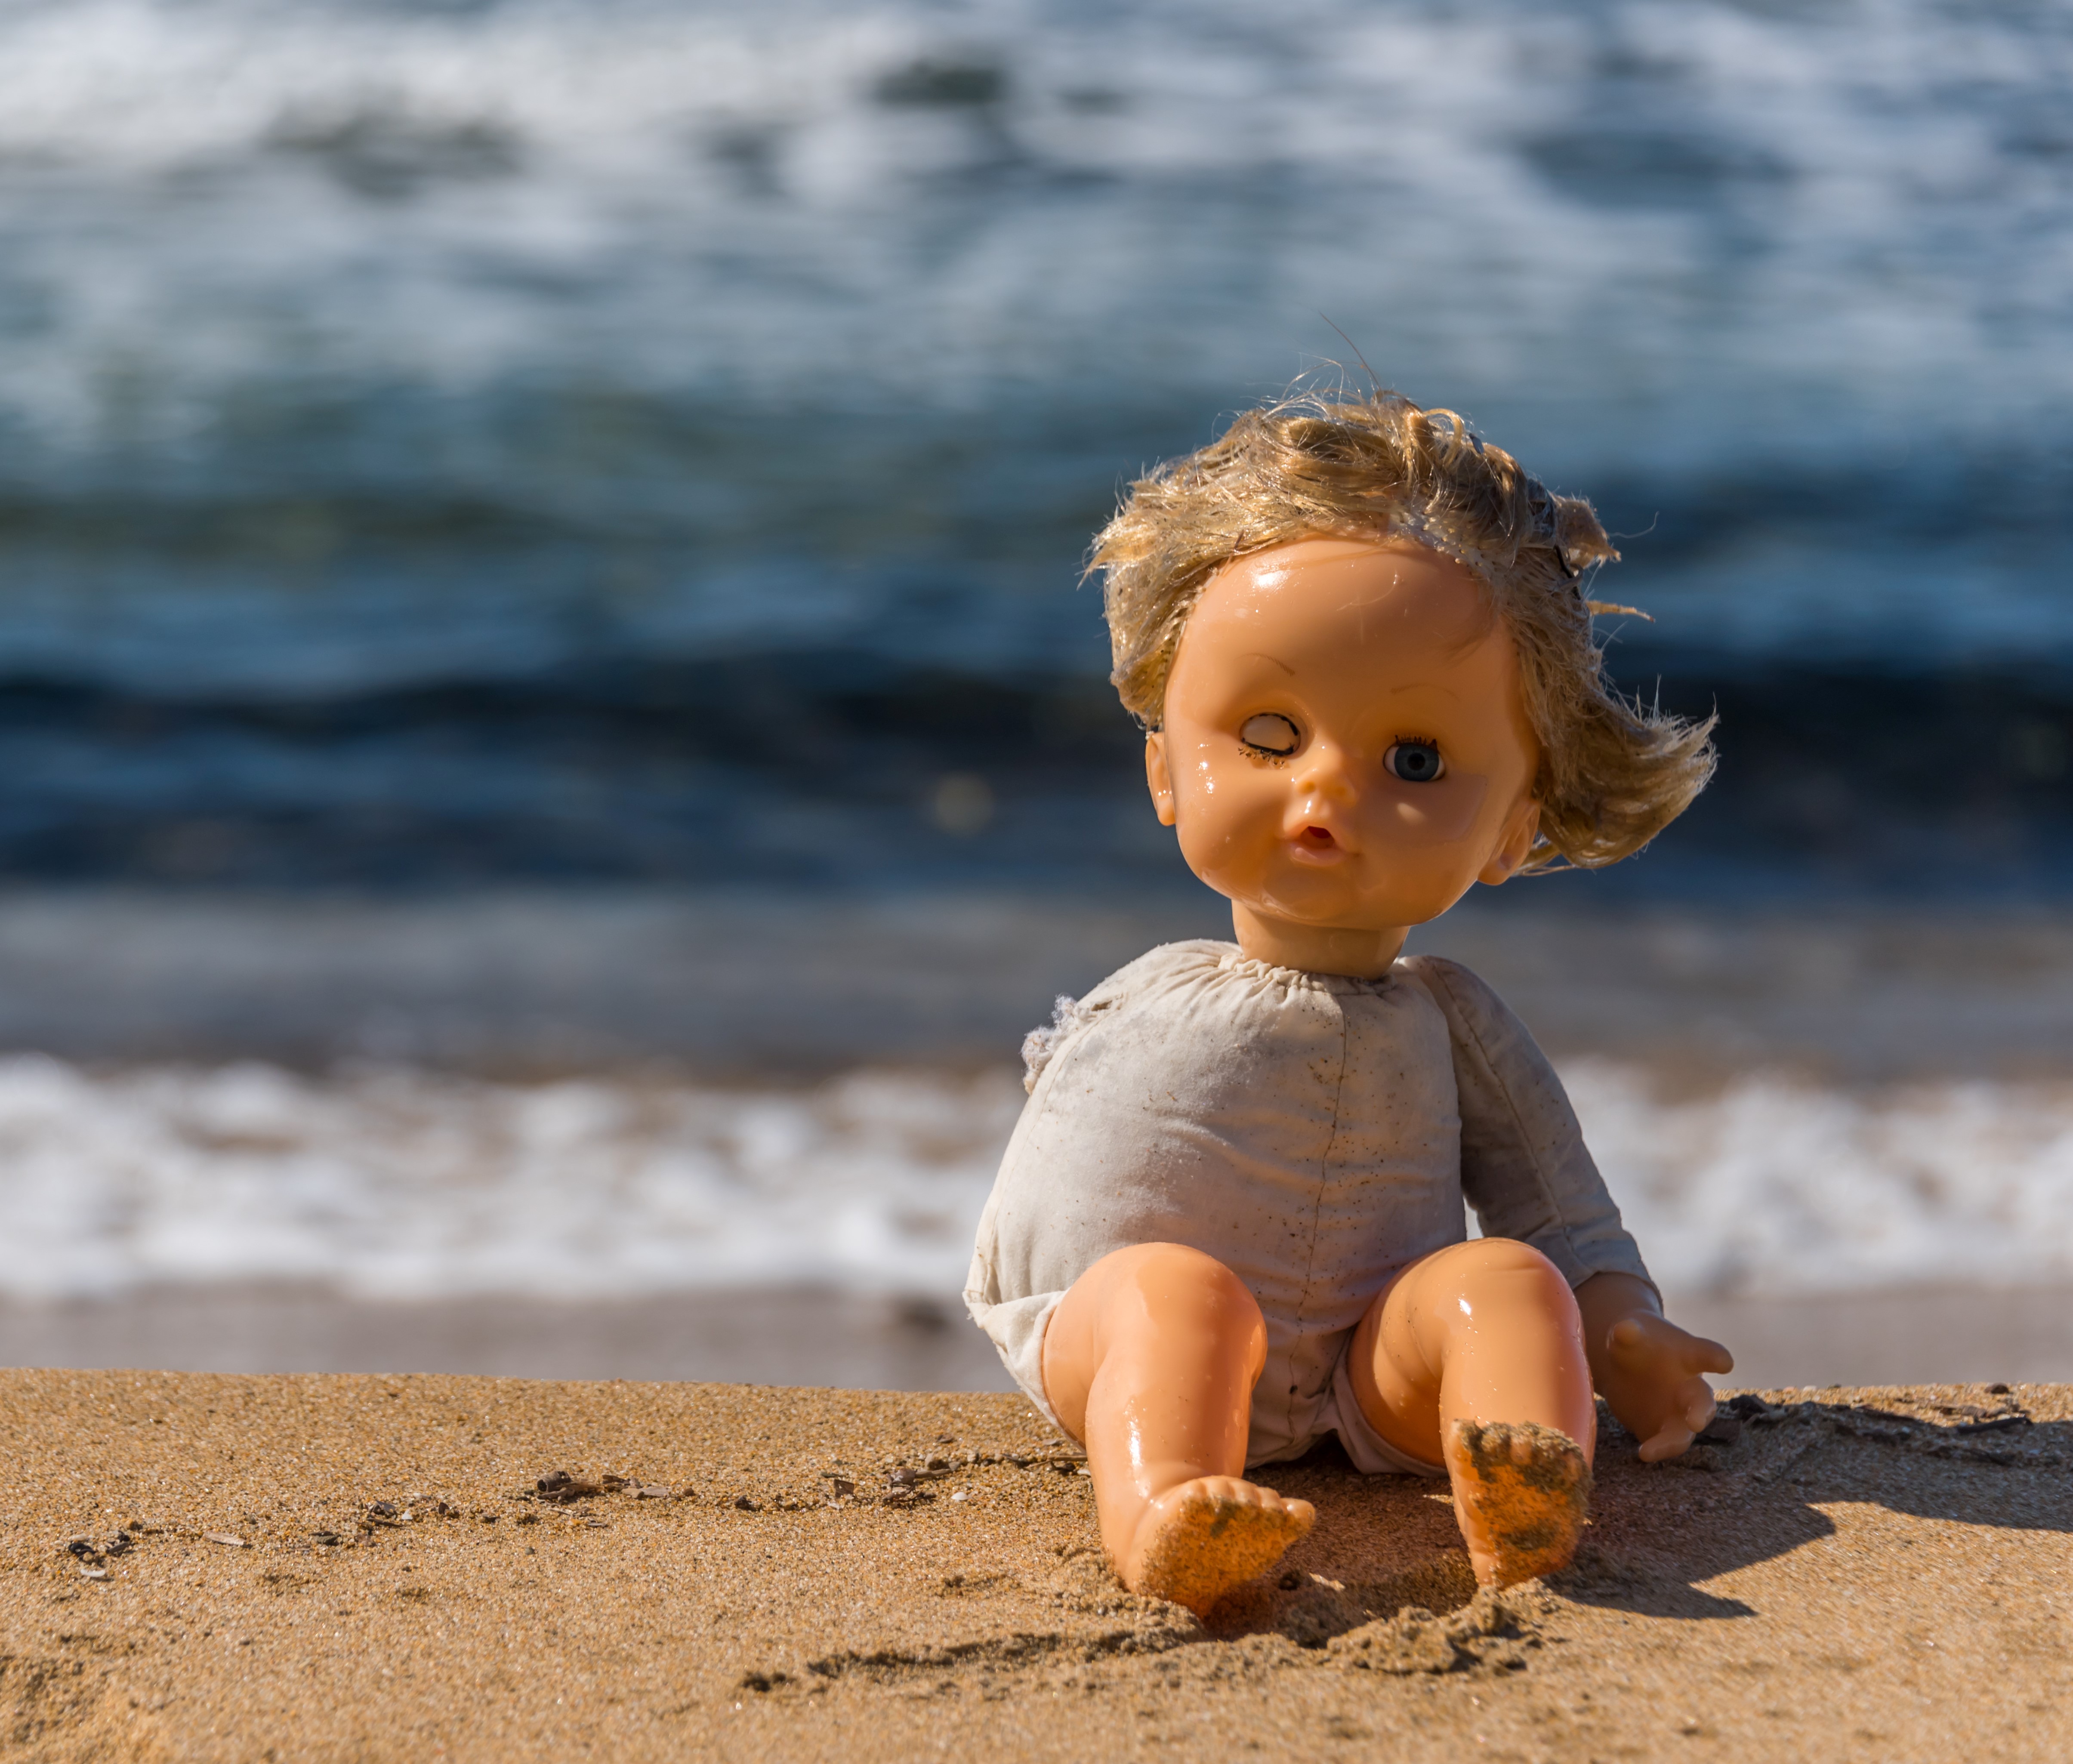 Old Broken Toy Doll Sitting on a Beach in Italy